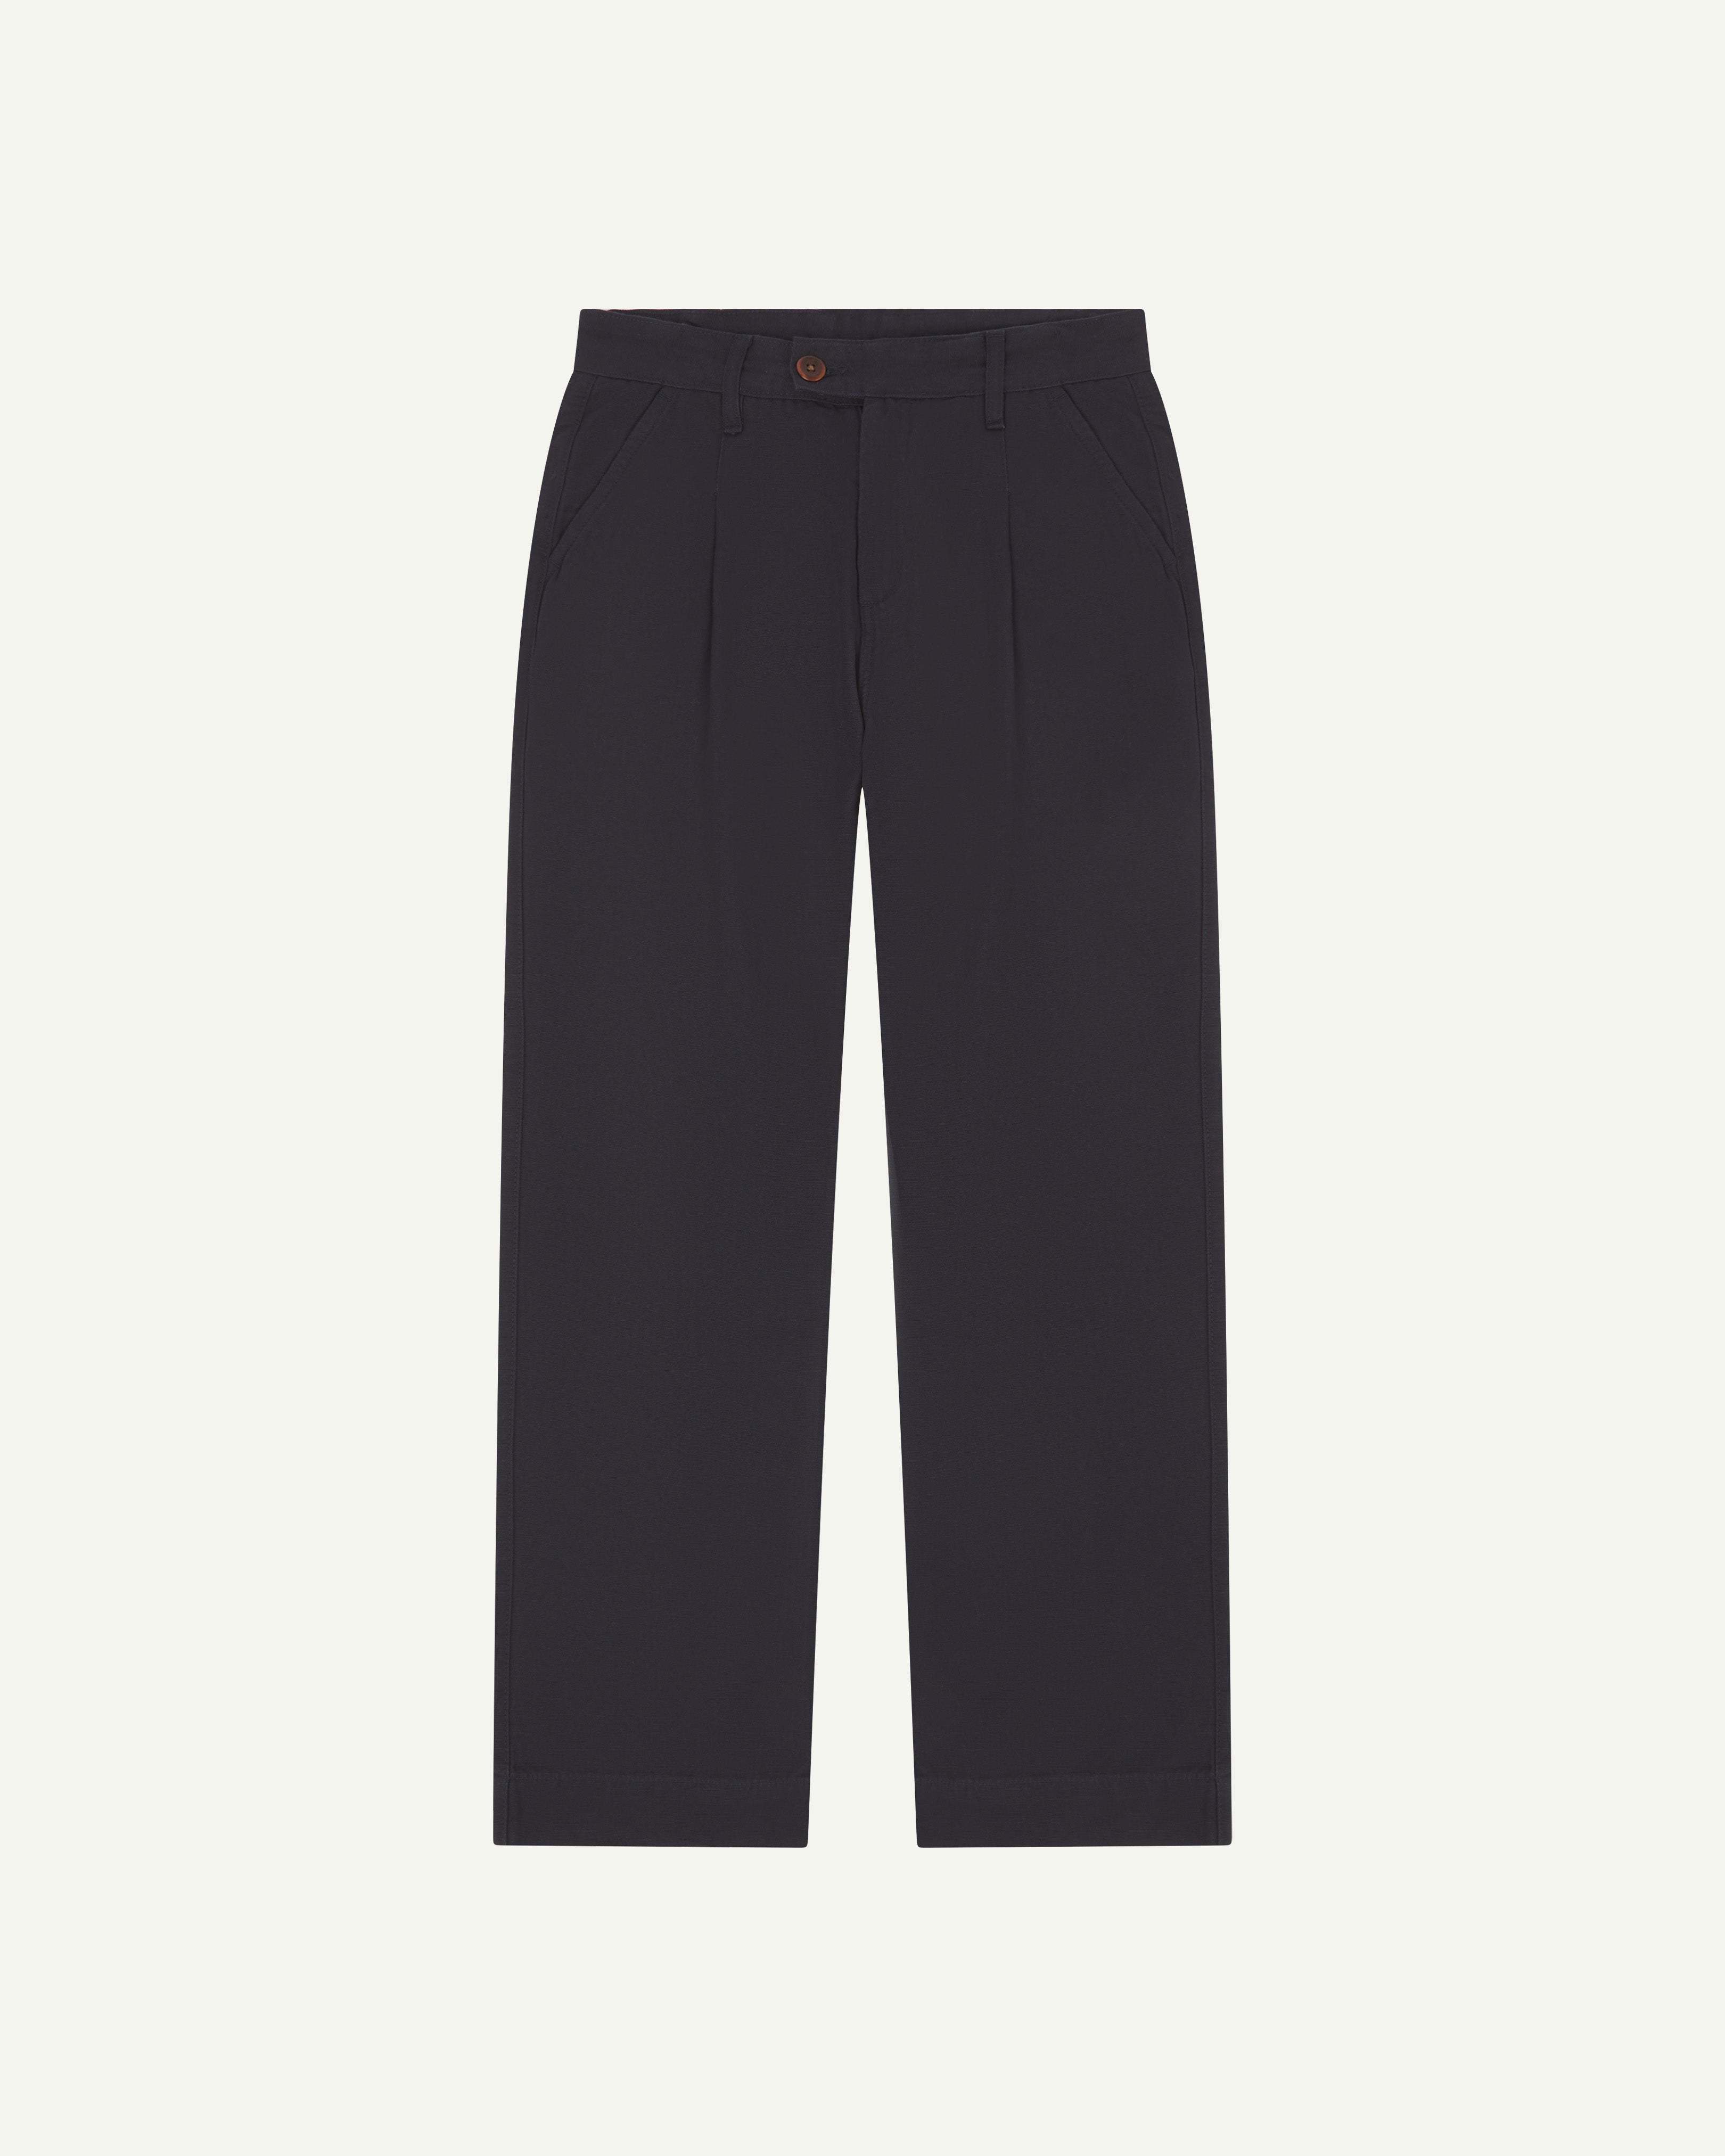 Front flat shot of #5018 Uskees men's organic mid-weight cotton boat trousers in navy blue showing wide leg style